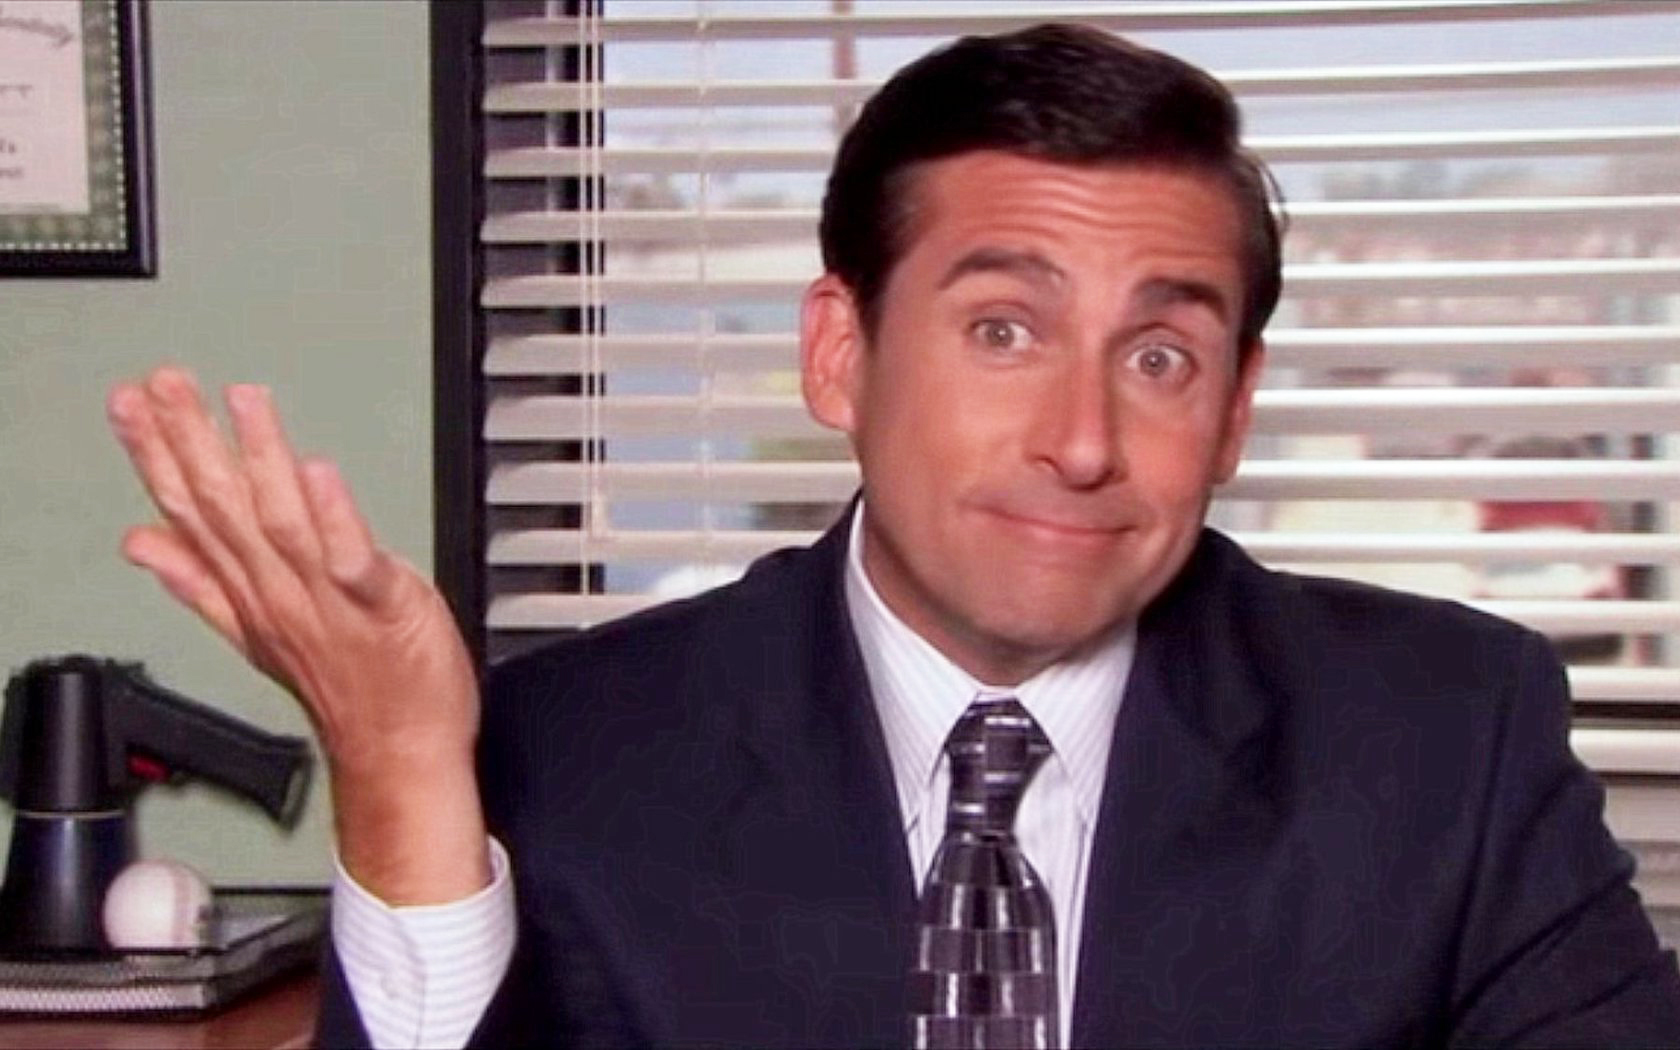 Moving To A New City: The Emotional Stages As Told By 'The Office'